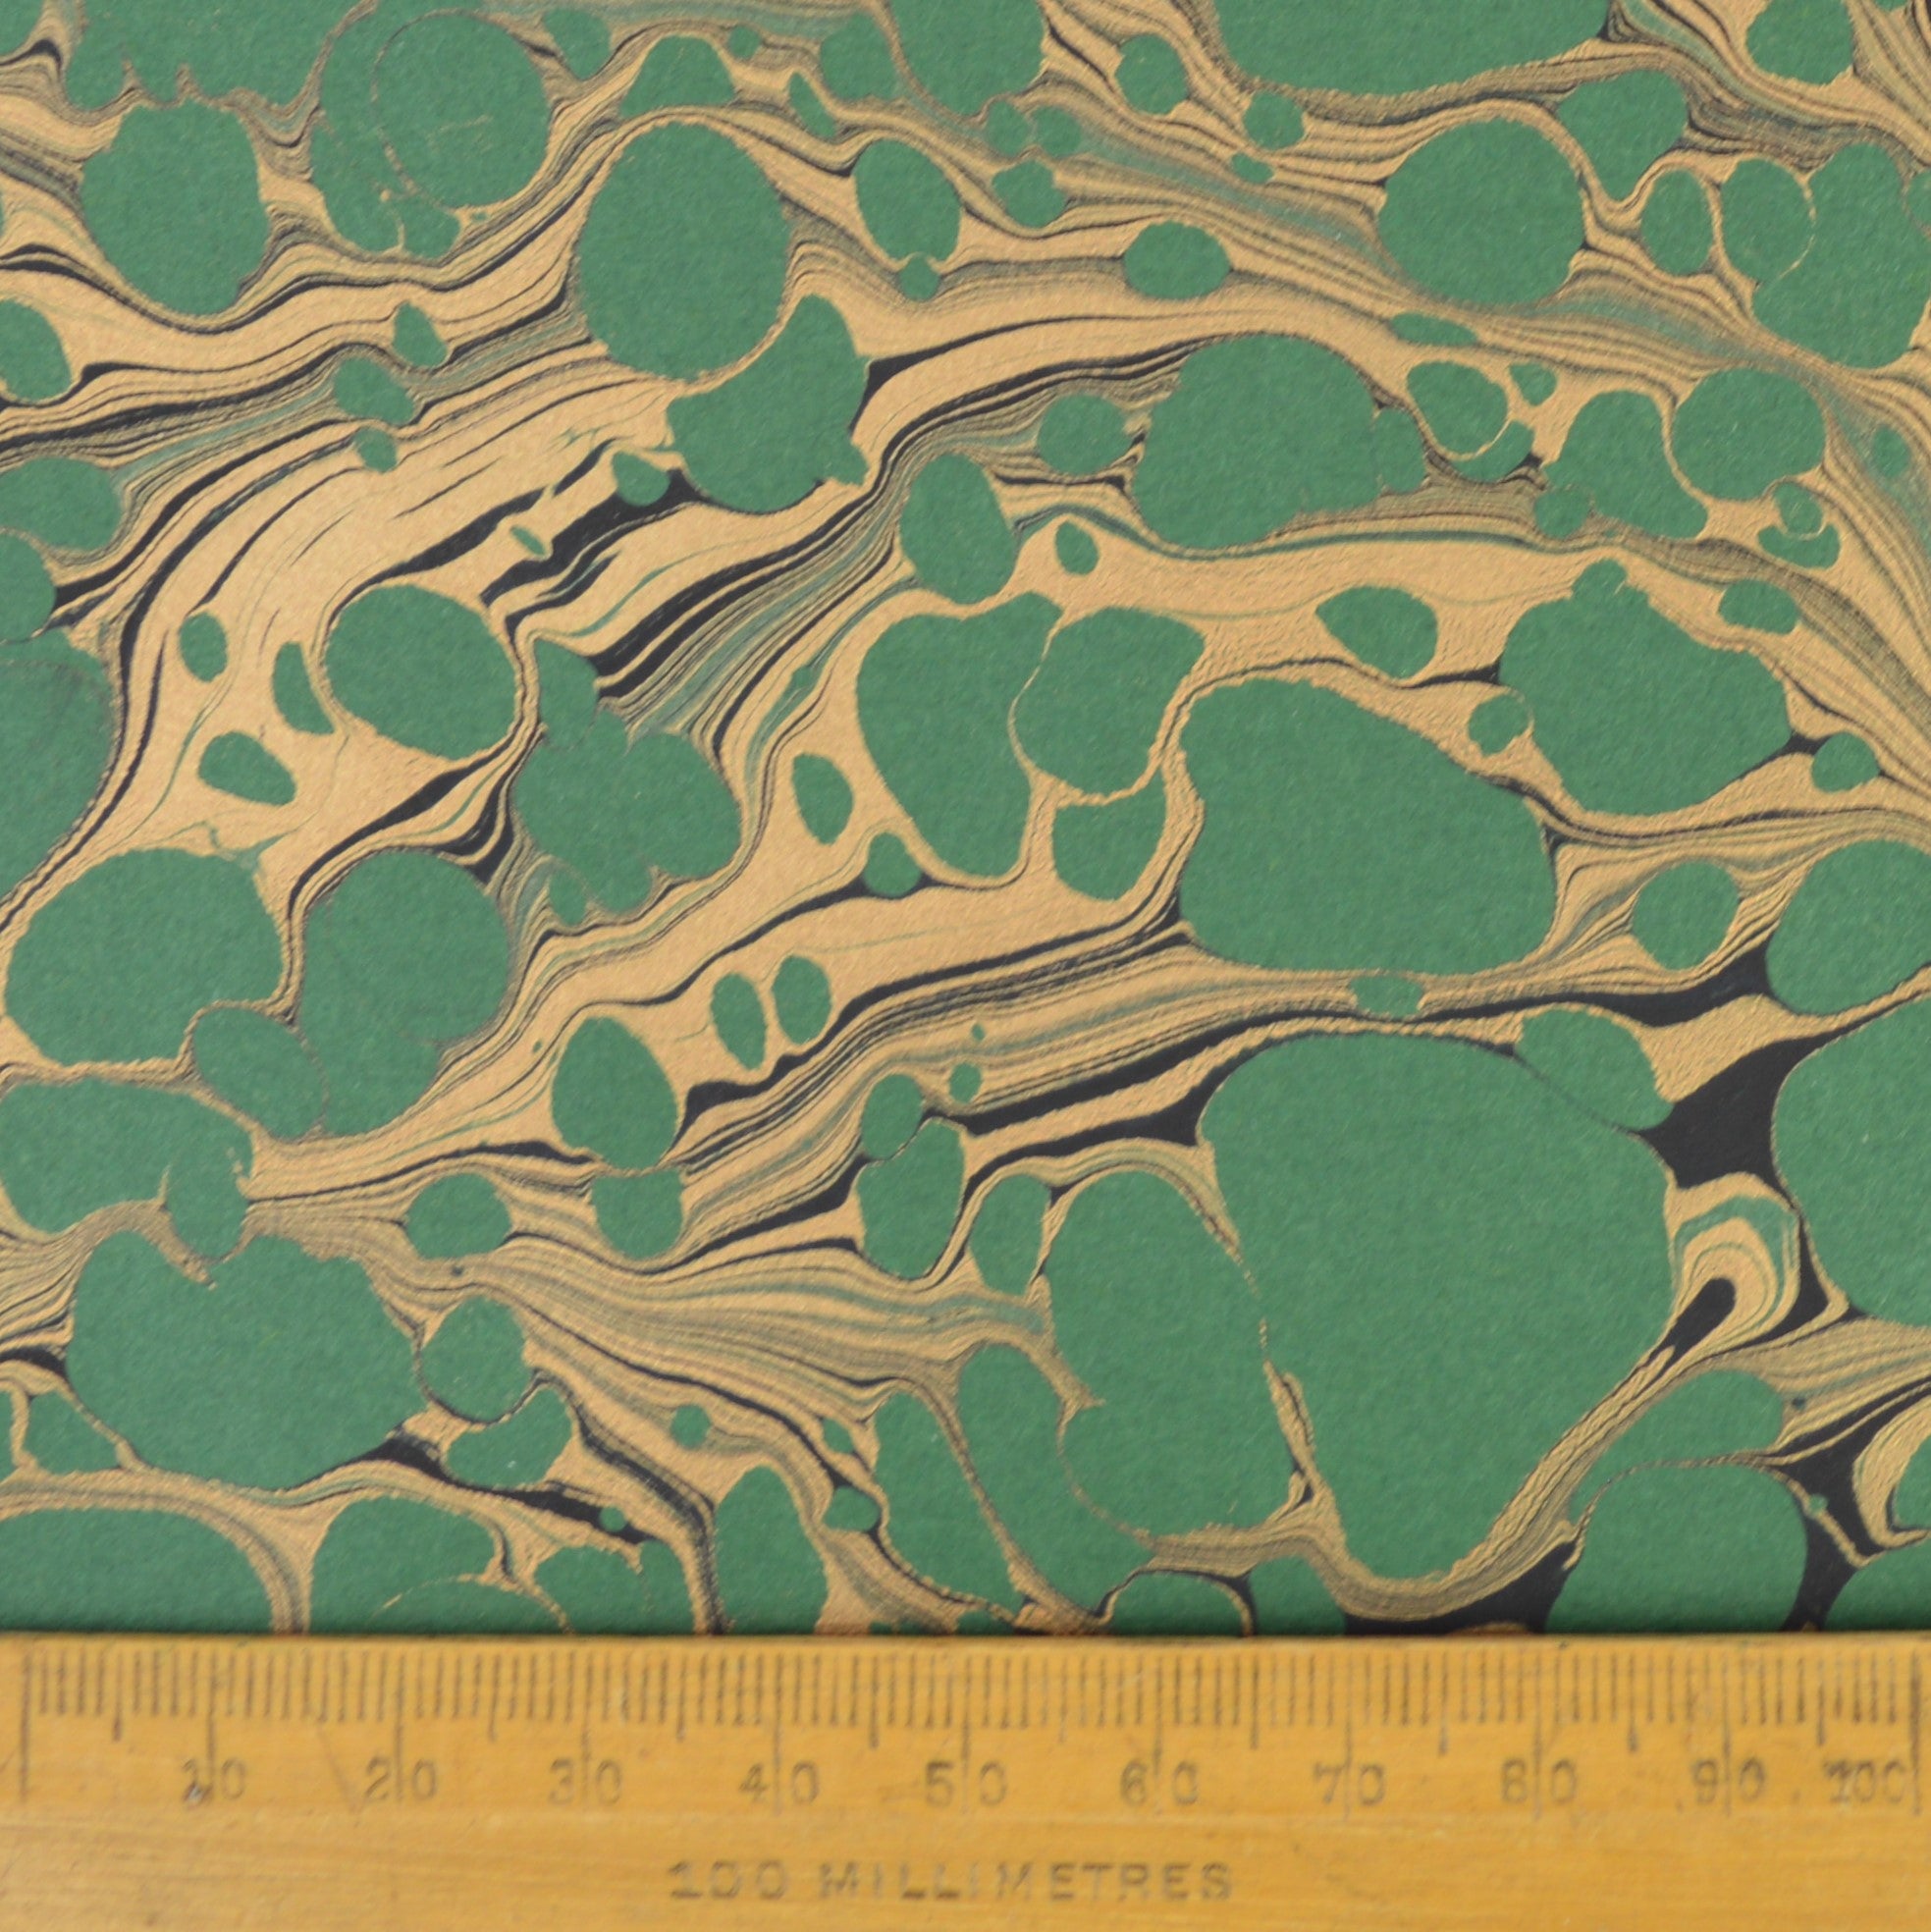 Munro and Kerr green and gold marbled paper lampshade